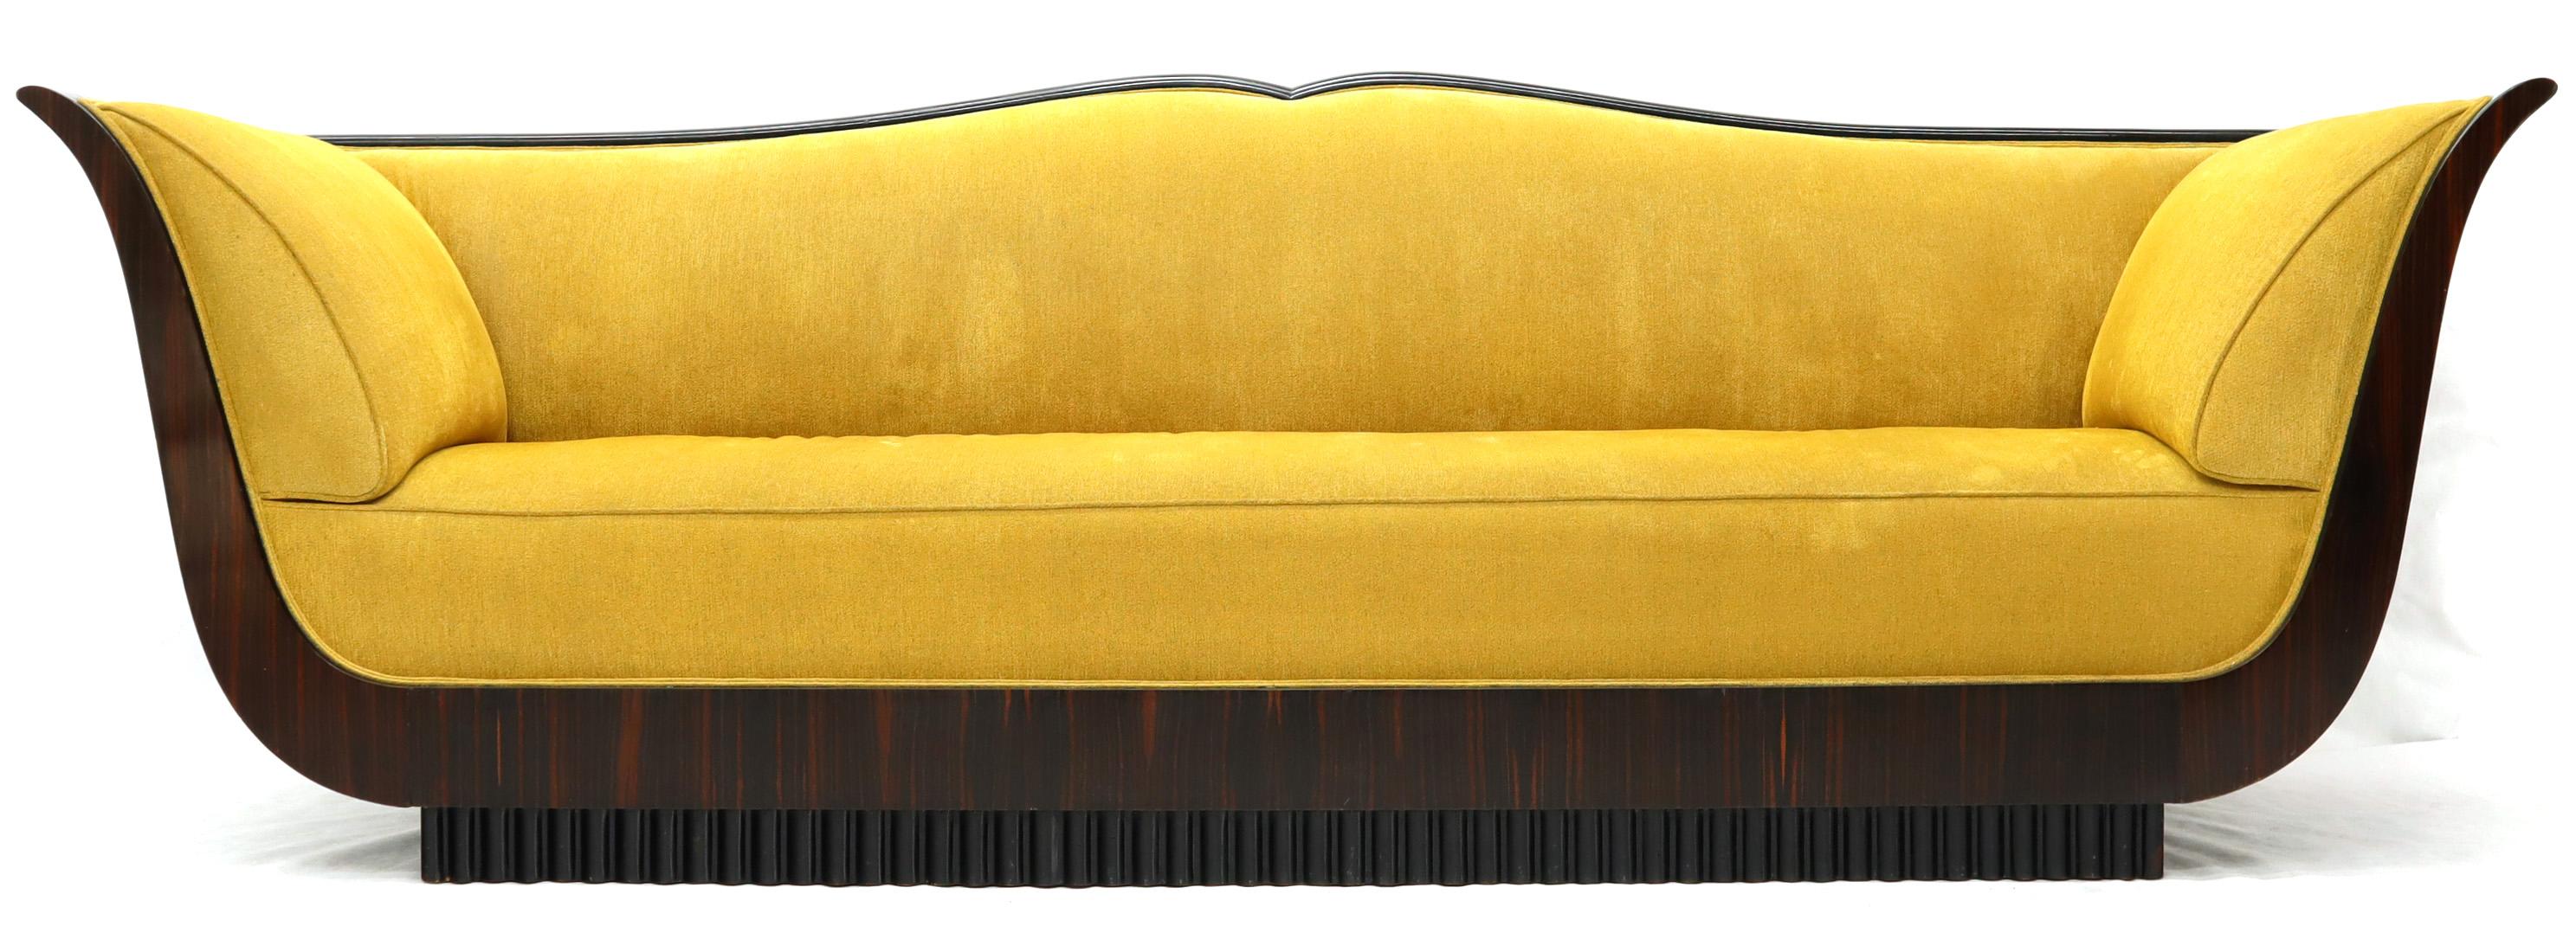 Large French Art Deco gold velvet upholstery grand sofa.
Rare find excellent original condition.